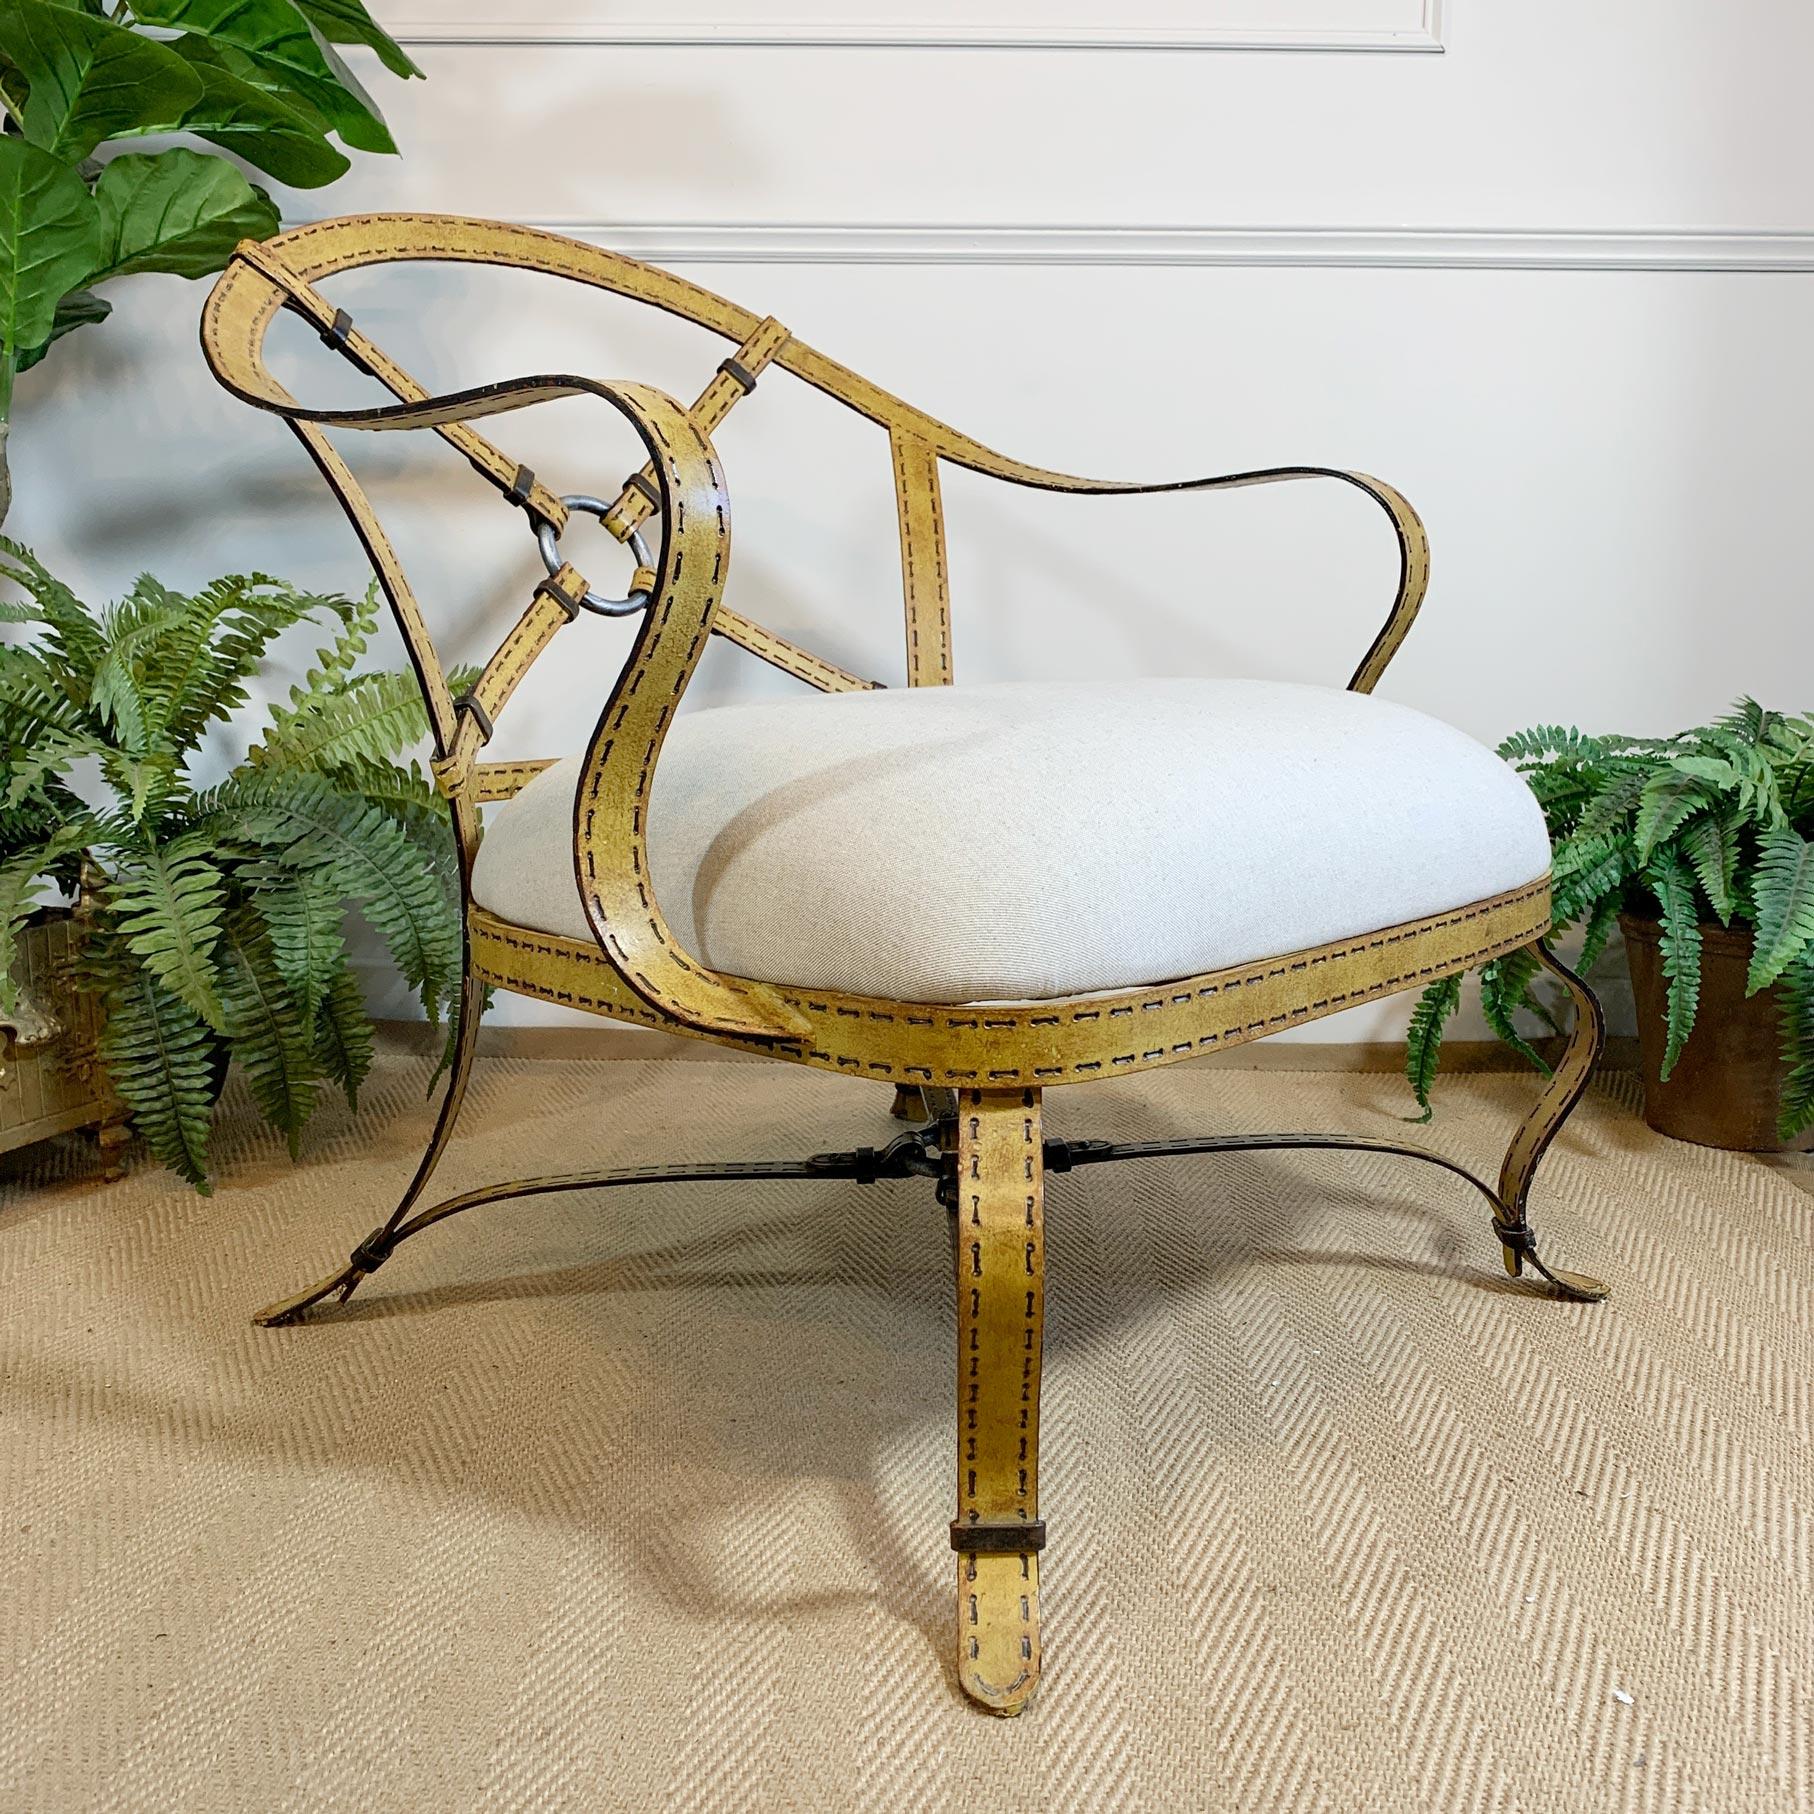 Incredible wrought iron chair, the frame designed to replicate leather equestrian harness straps, very much in the manner of Hermés and Jacques Adnet. 

The attention to detail is quite exceptional, the trompe l’oeil technique has been used to